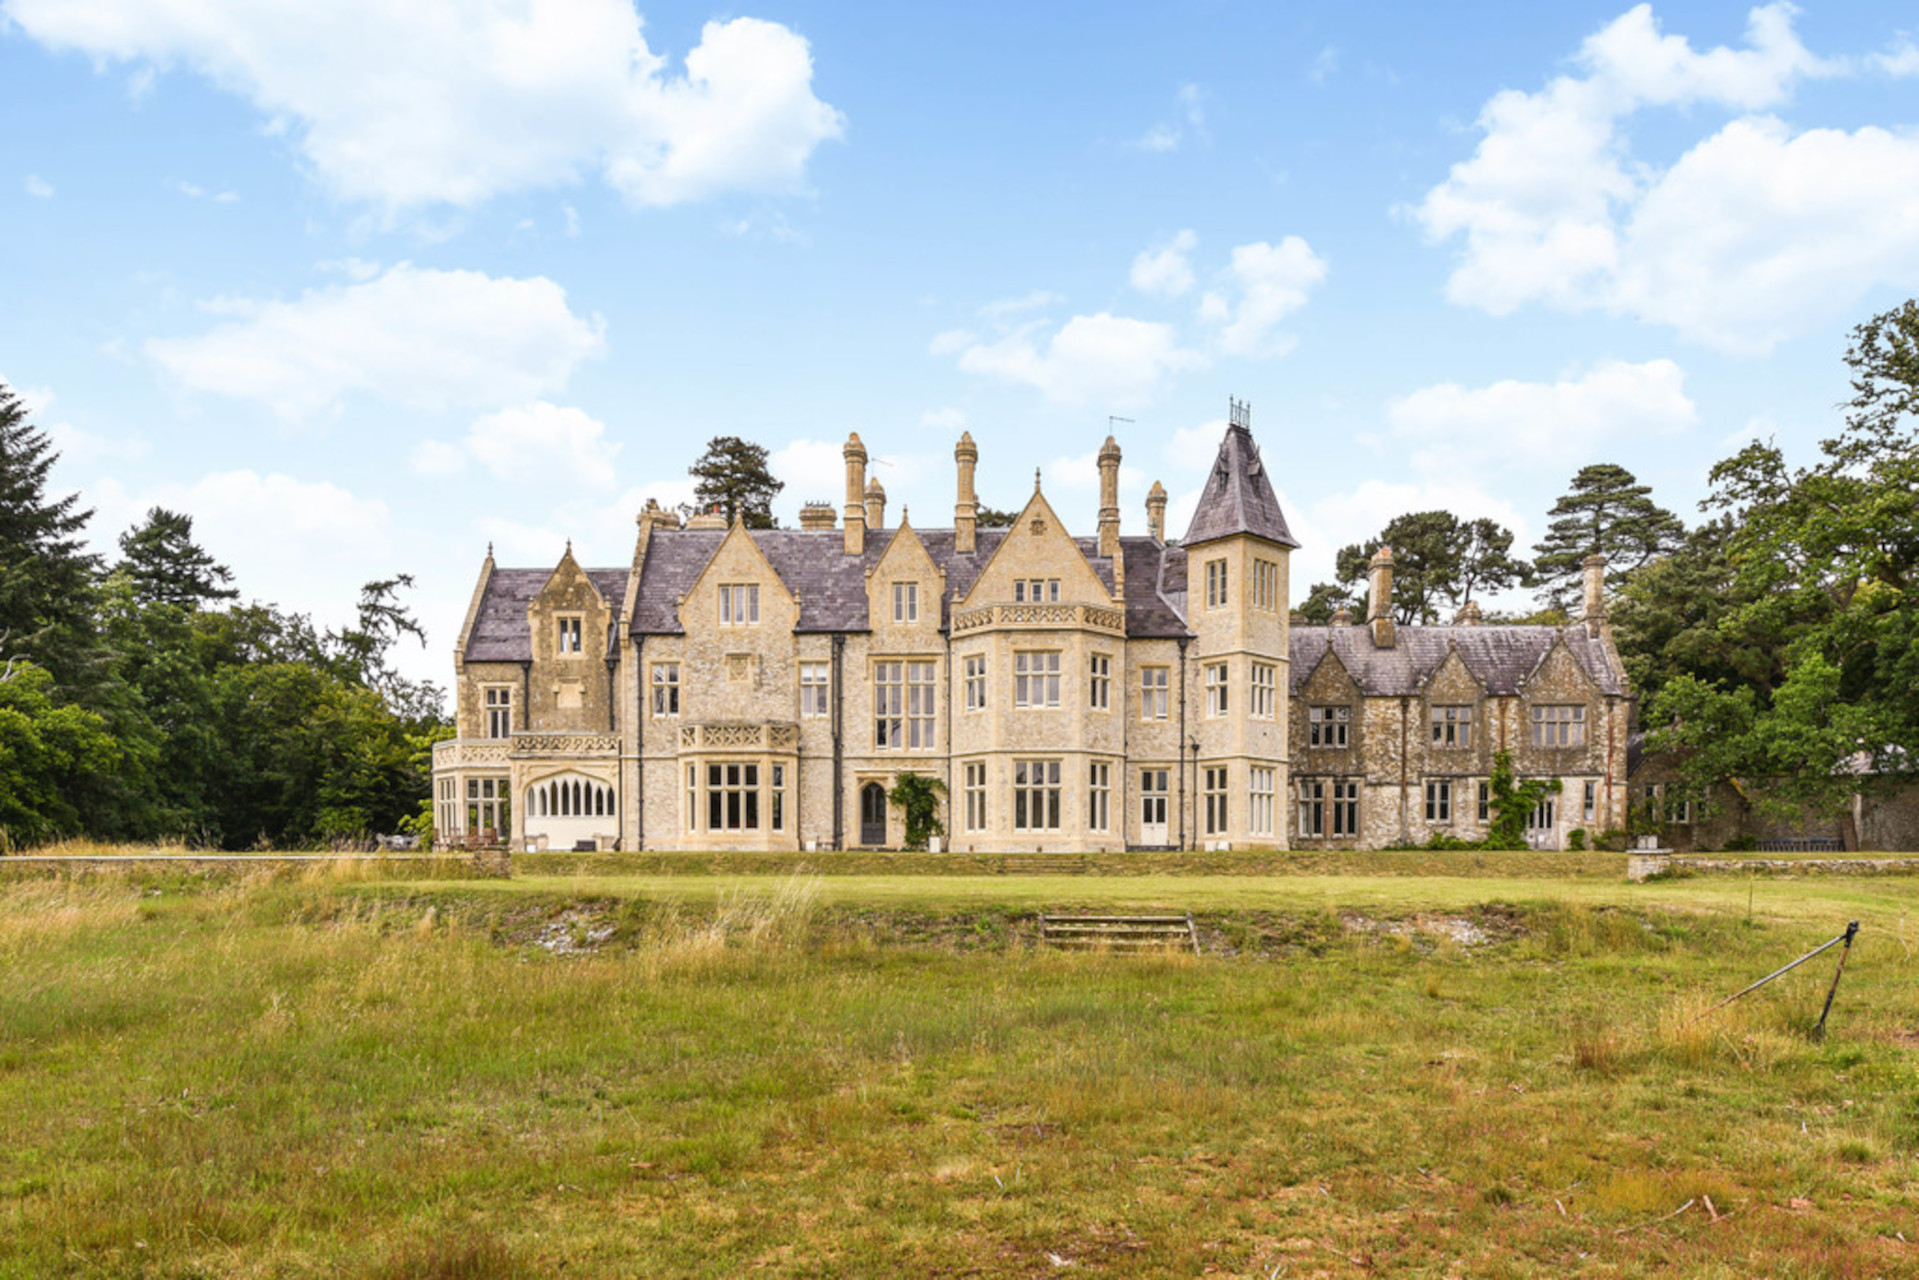 A Country Home Commissioned By The Bonham Carter Family Is Up For Sale